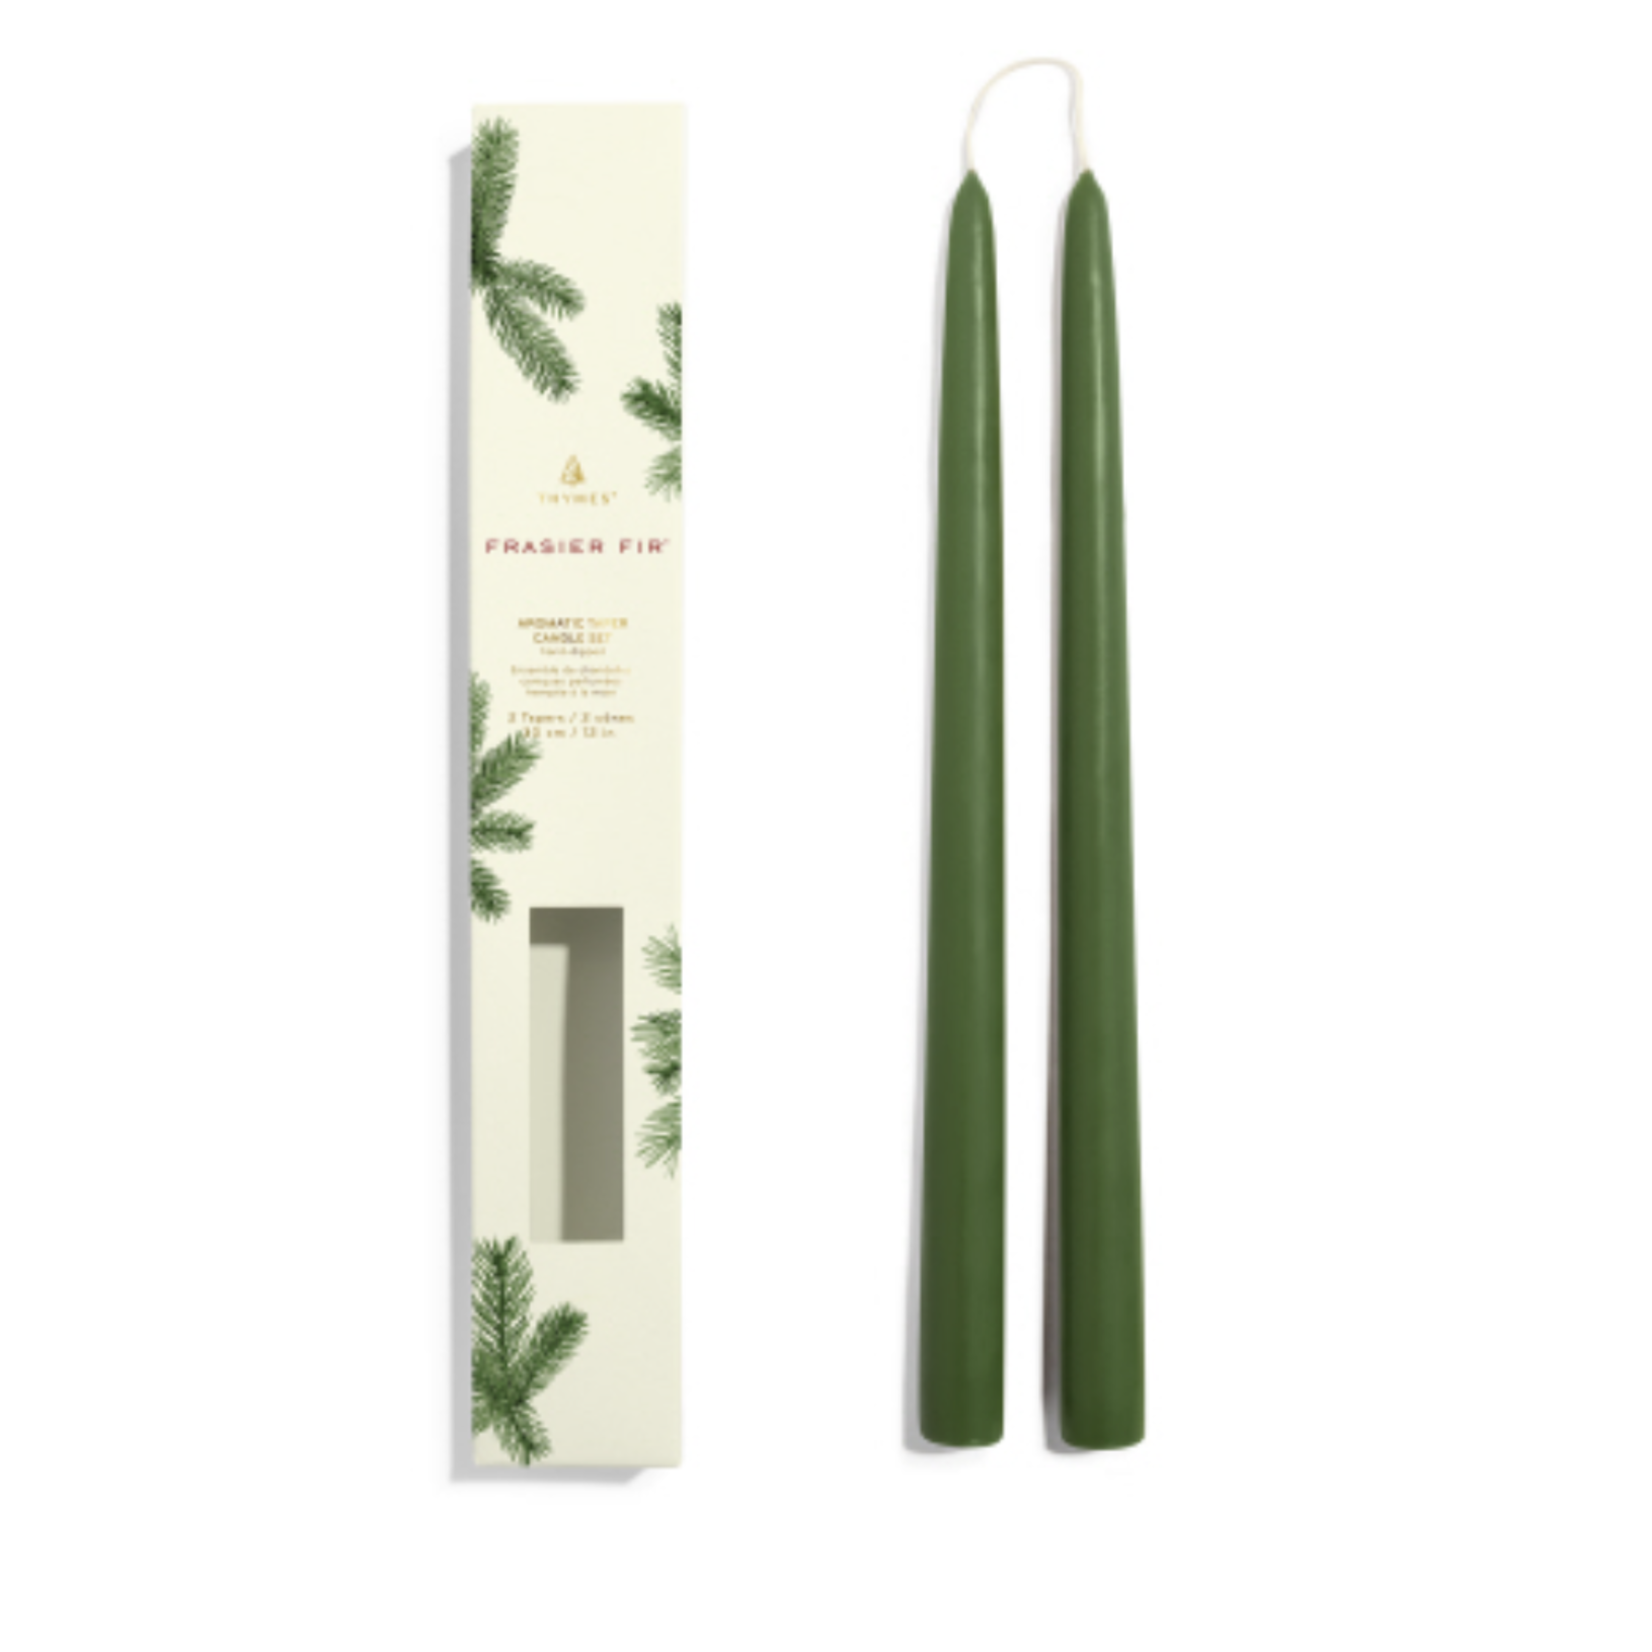 Thymes Frasier Fir Frosted Plaid Petite Reed Diffuser